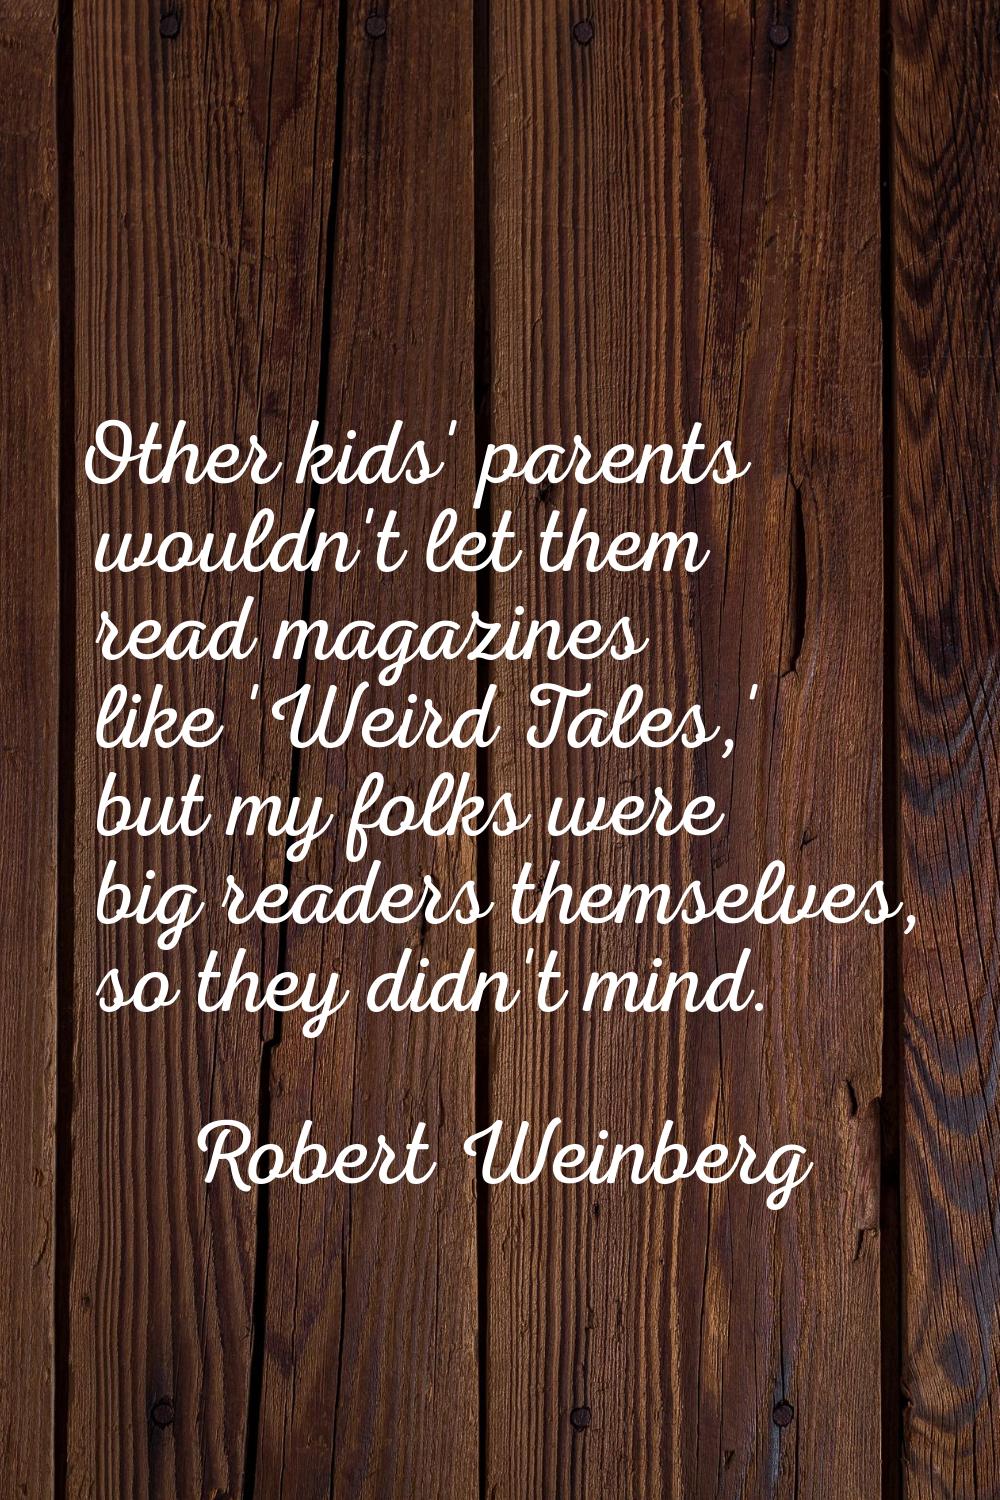 Other kids' parents wouldn't let them read magazines like 'Weird Tales,' but my folks were big read